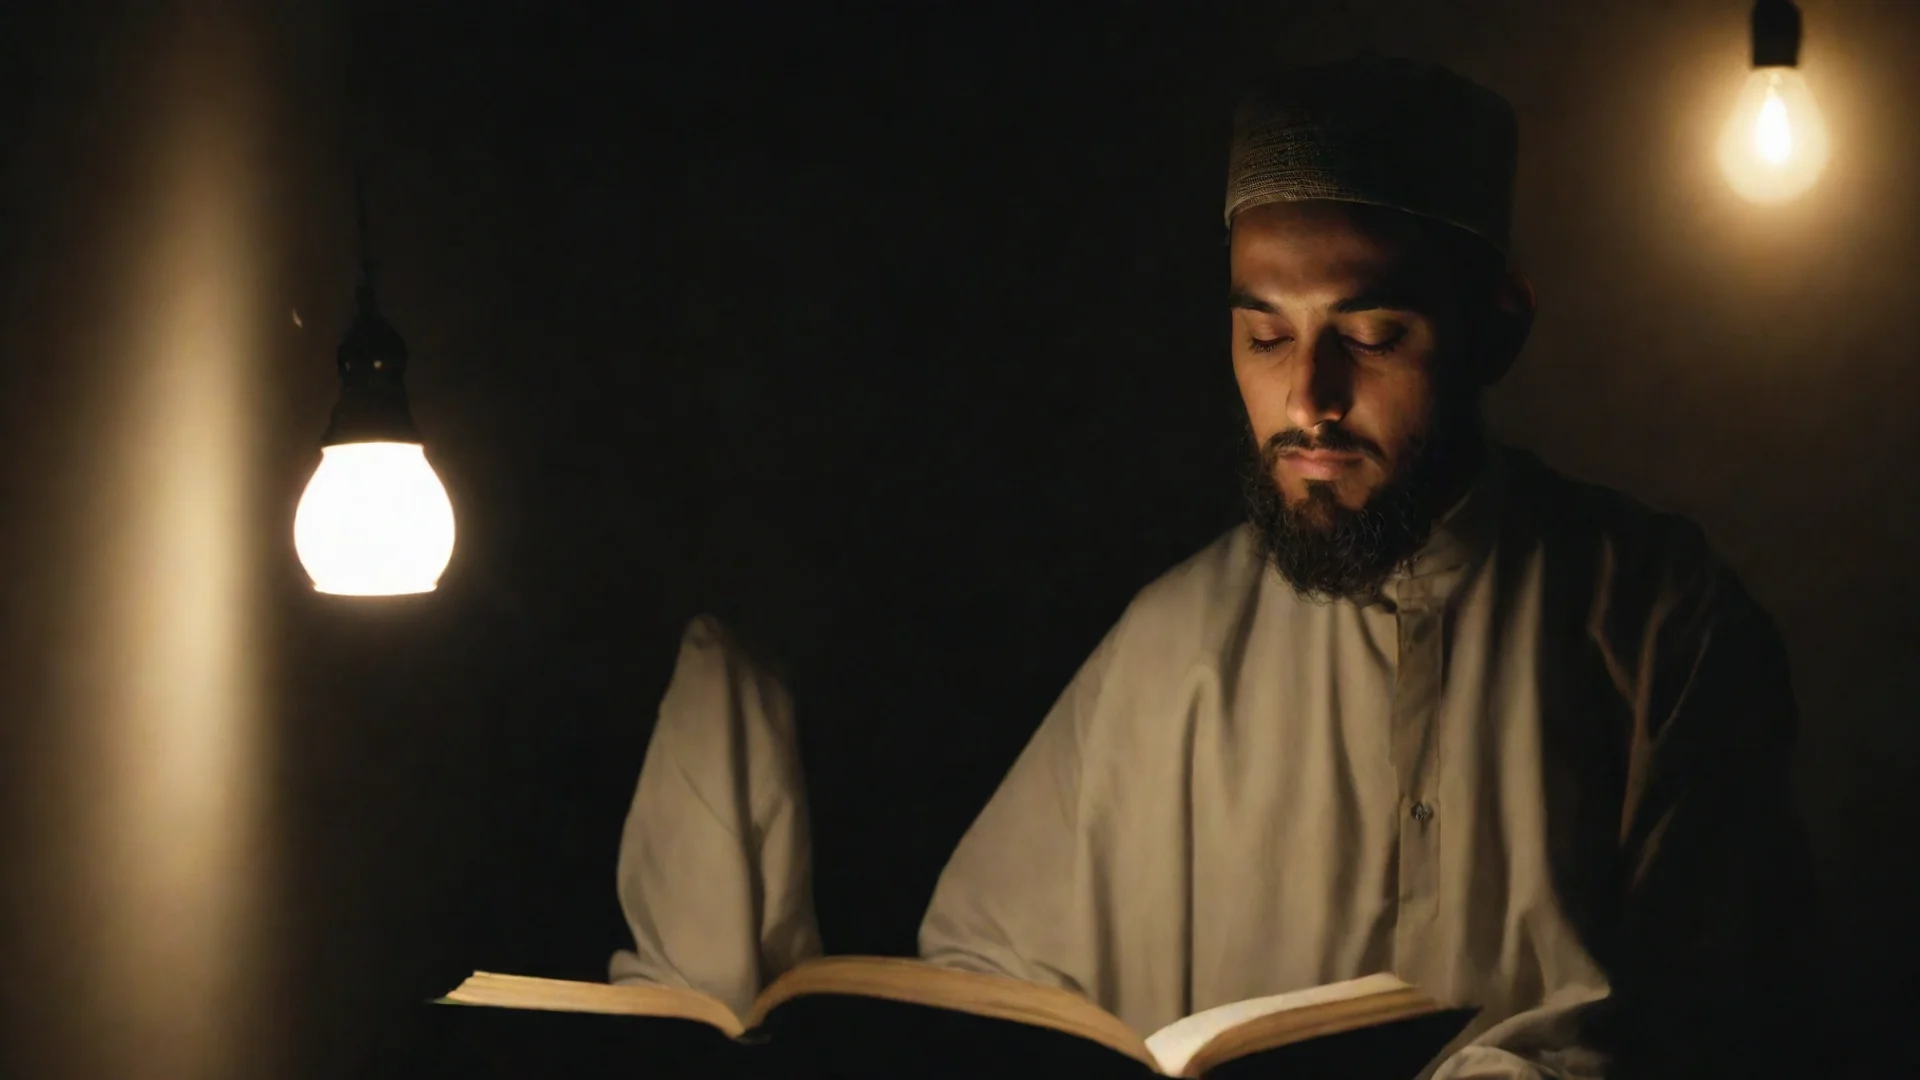 aiamazing a muslim man reading a book in a dark room with lamp light. awesome portrait 2 wide